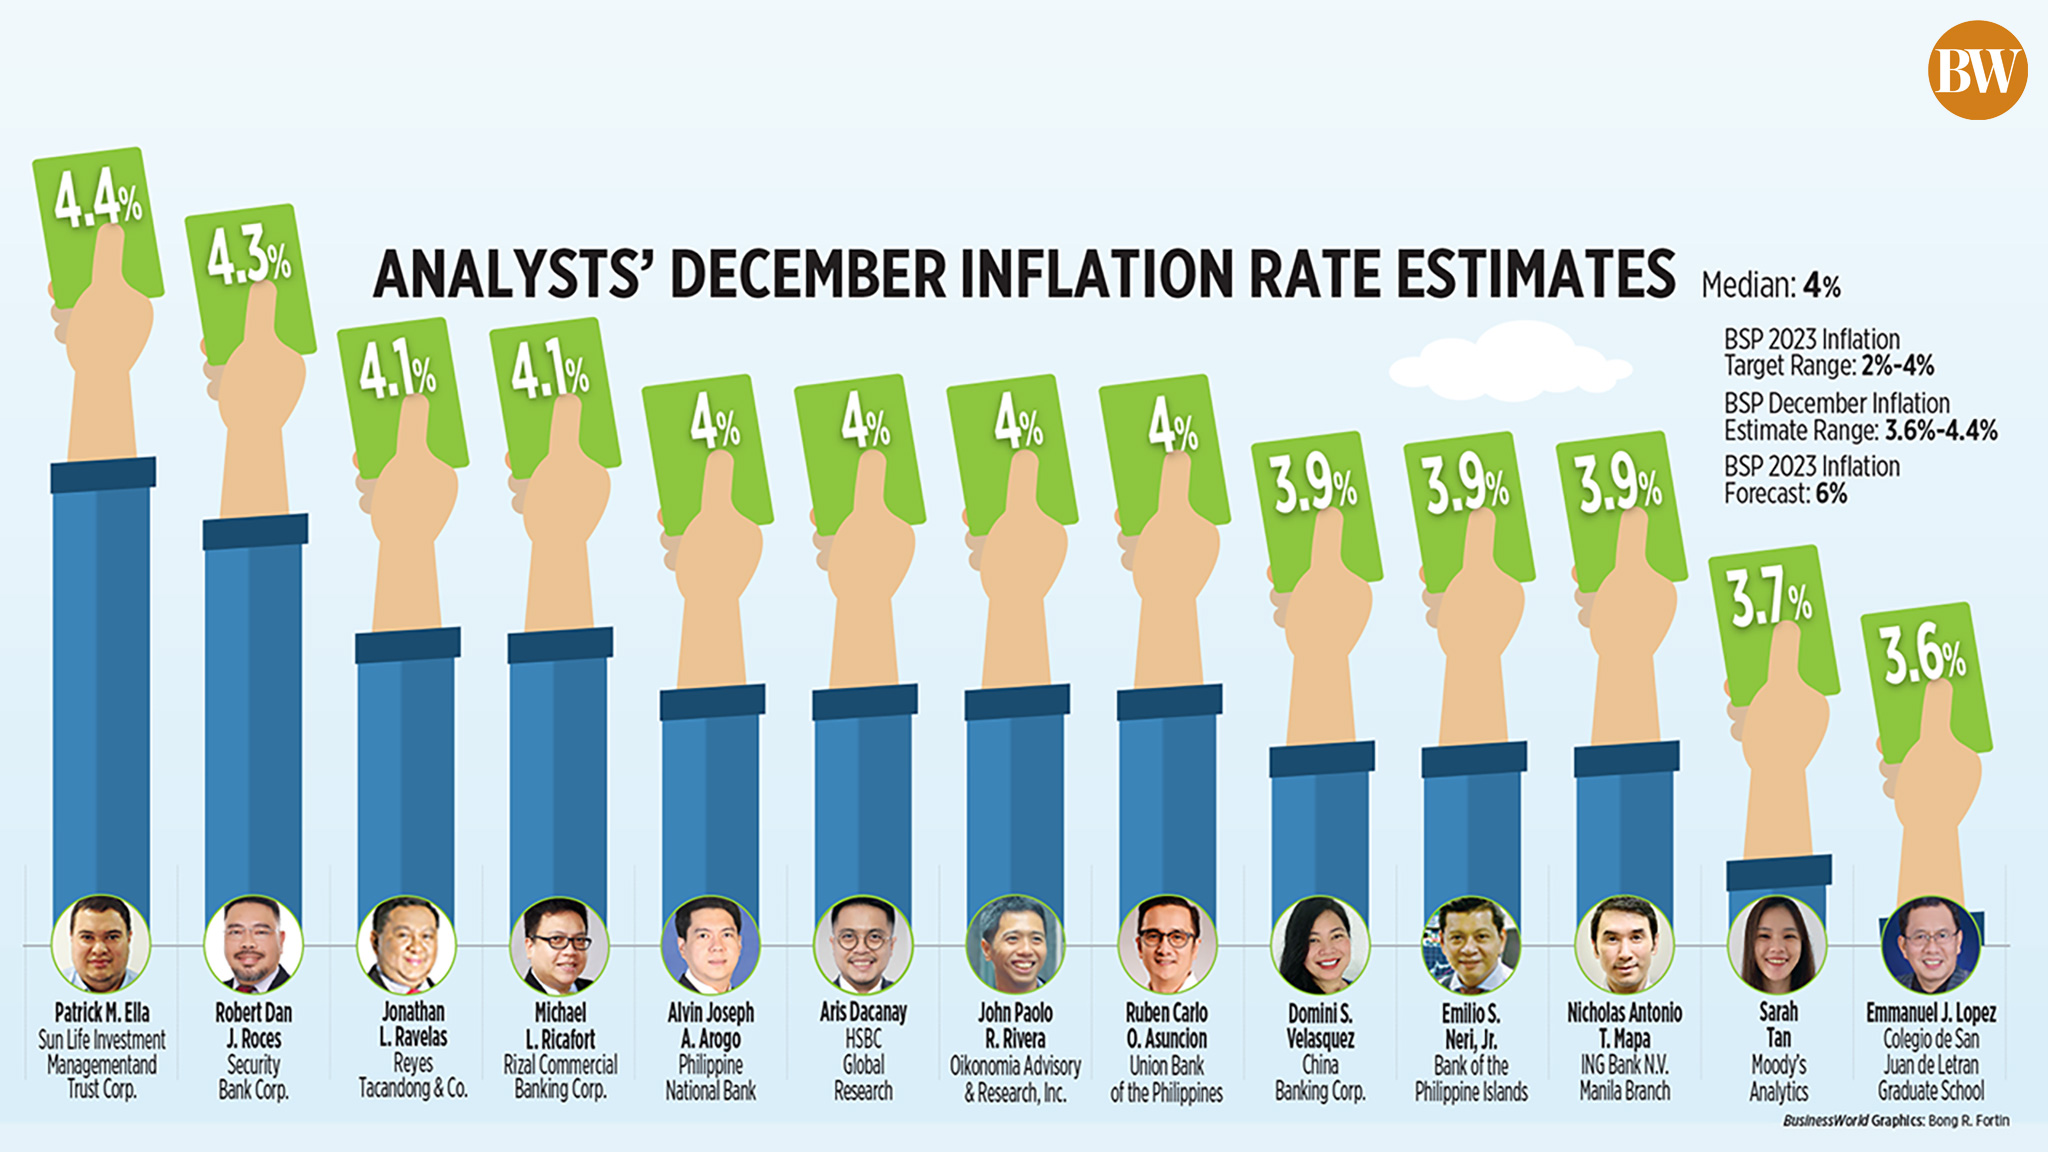 Analysts' December inflation rate estimates